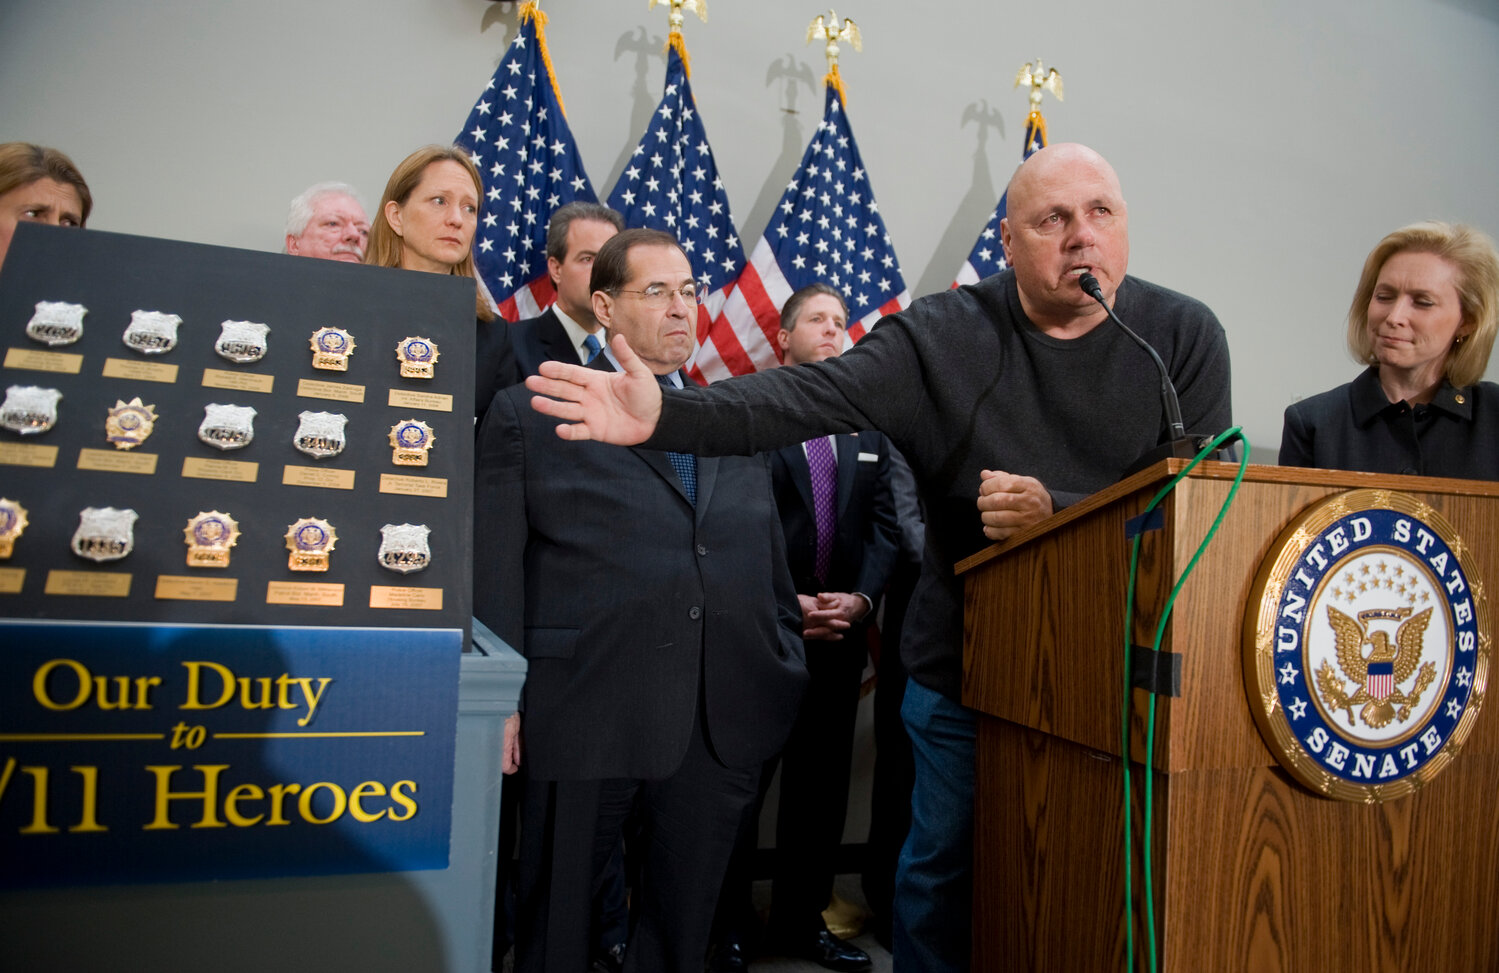 Joseph Zadroga, the father of NYPD Detective James Zadroga, who died of a respiratory illness after assisting in rescue efforts at Ground Zero, spoke at a news conference unveiling replica badges belonging to members of the NYPD who have subsequently died of 9/11 related illnesses. Joseph Zadroga, who was instrumental in getting Congress to pass legislation establishing the World Trade Center Program, died Saturday.